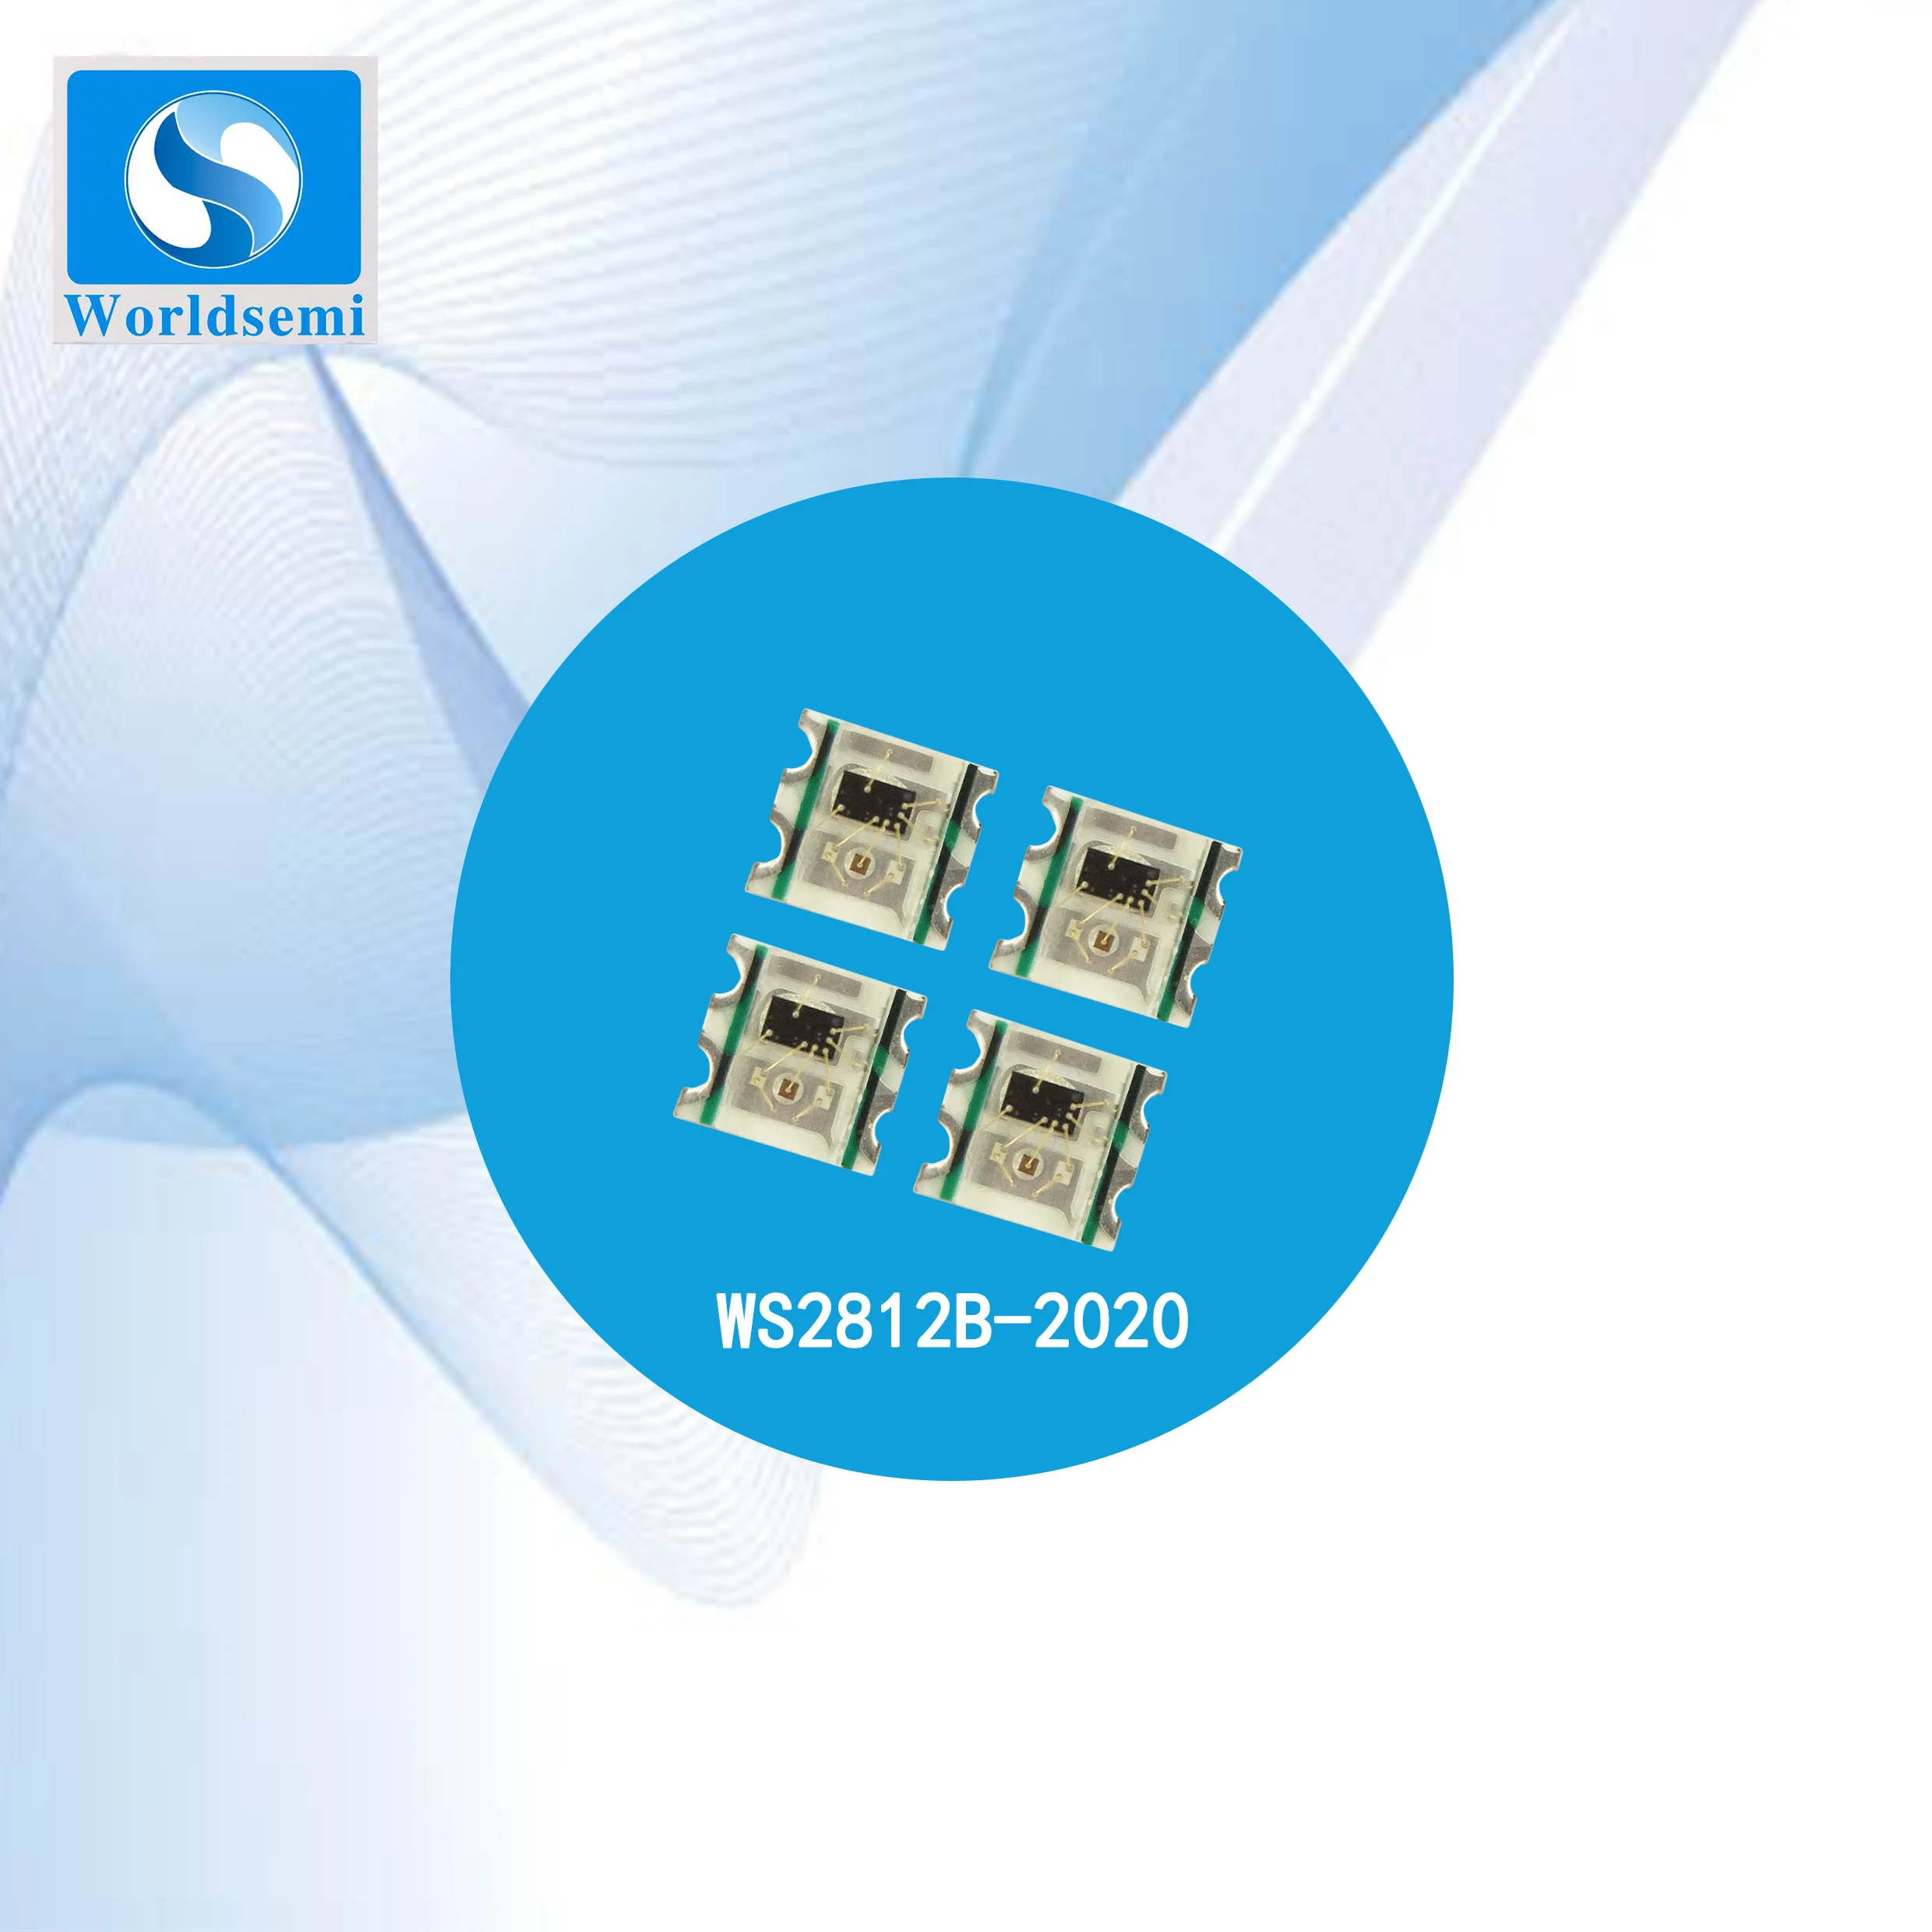 Hot selling WS2812C,WS2812B 2020 integrated light source led chip